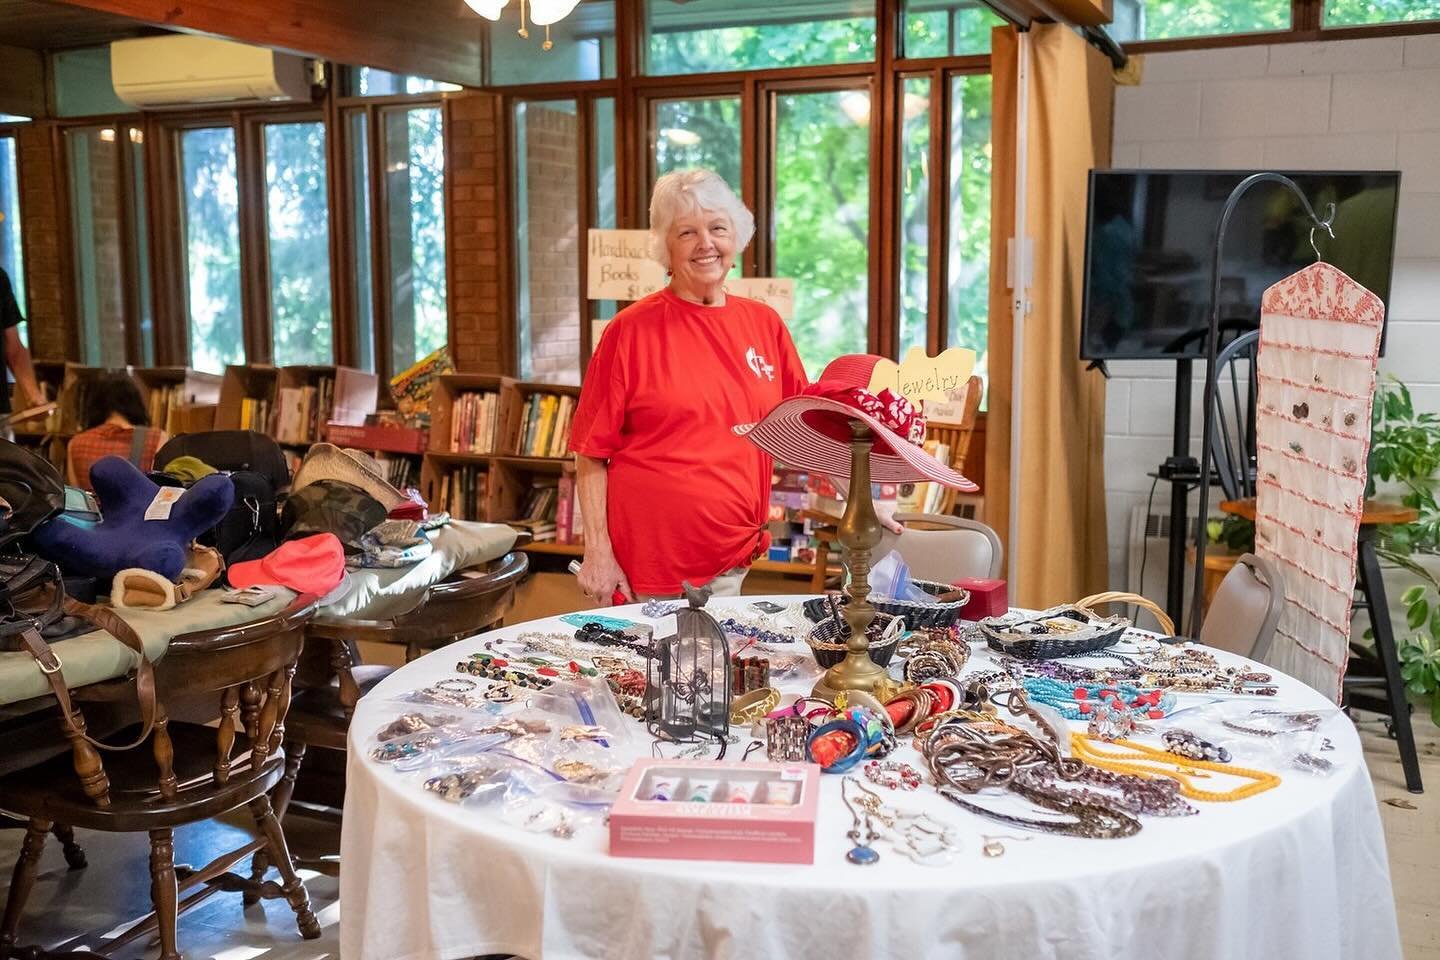 The Annual Trash and Treasures Sale returns to Mars Hill United Methodist Church on Saturday May 4 from 8 am until 1 pm. The sale is sponsored by the United Women in Faith, formerly known as United Methodist Women (UMW).

Trash &amp; Treasures Sale
S